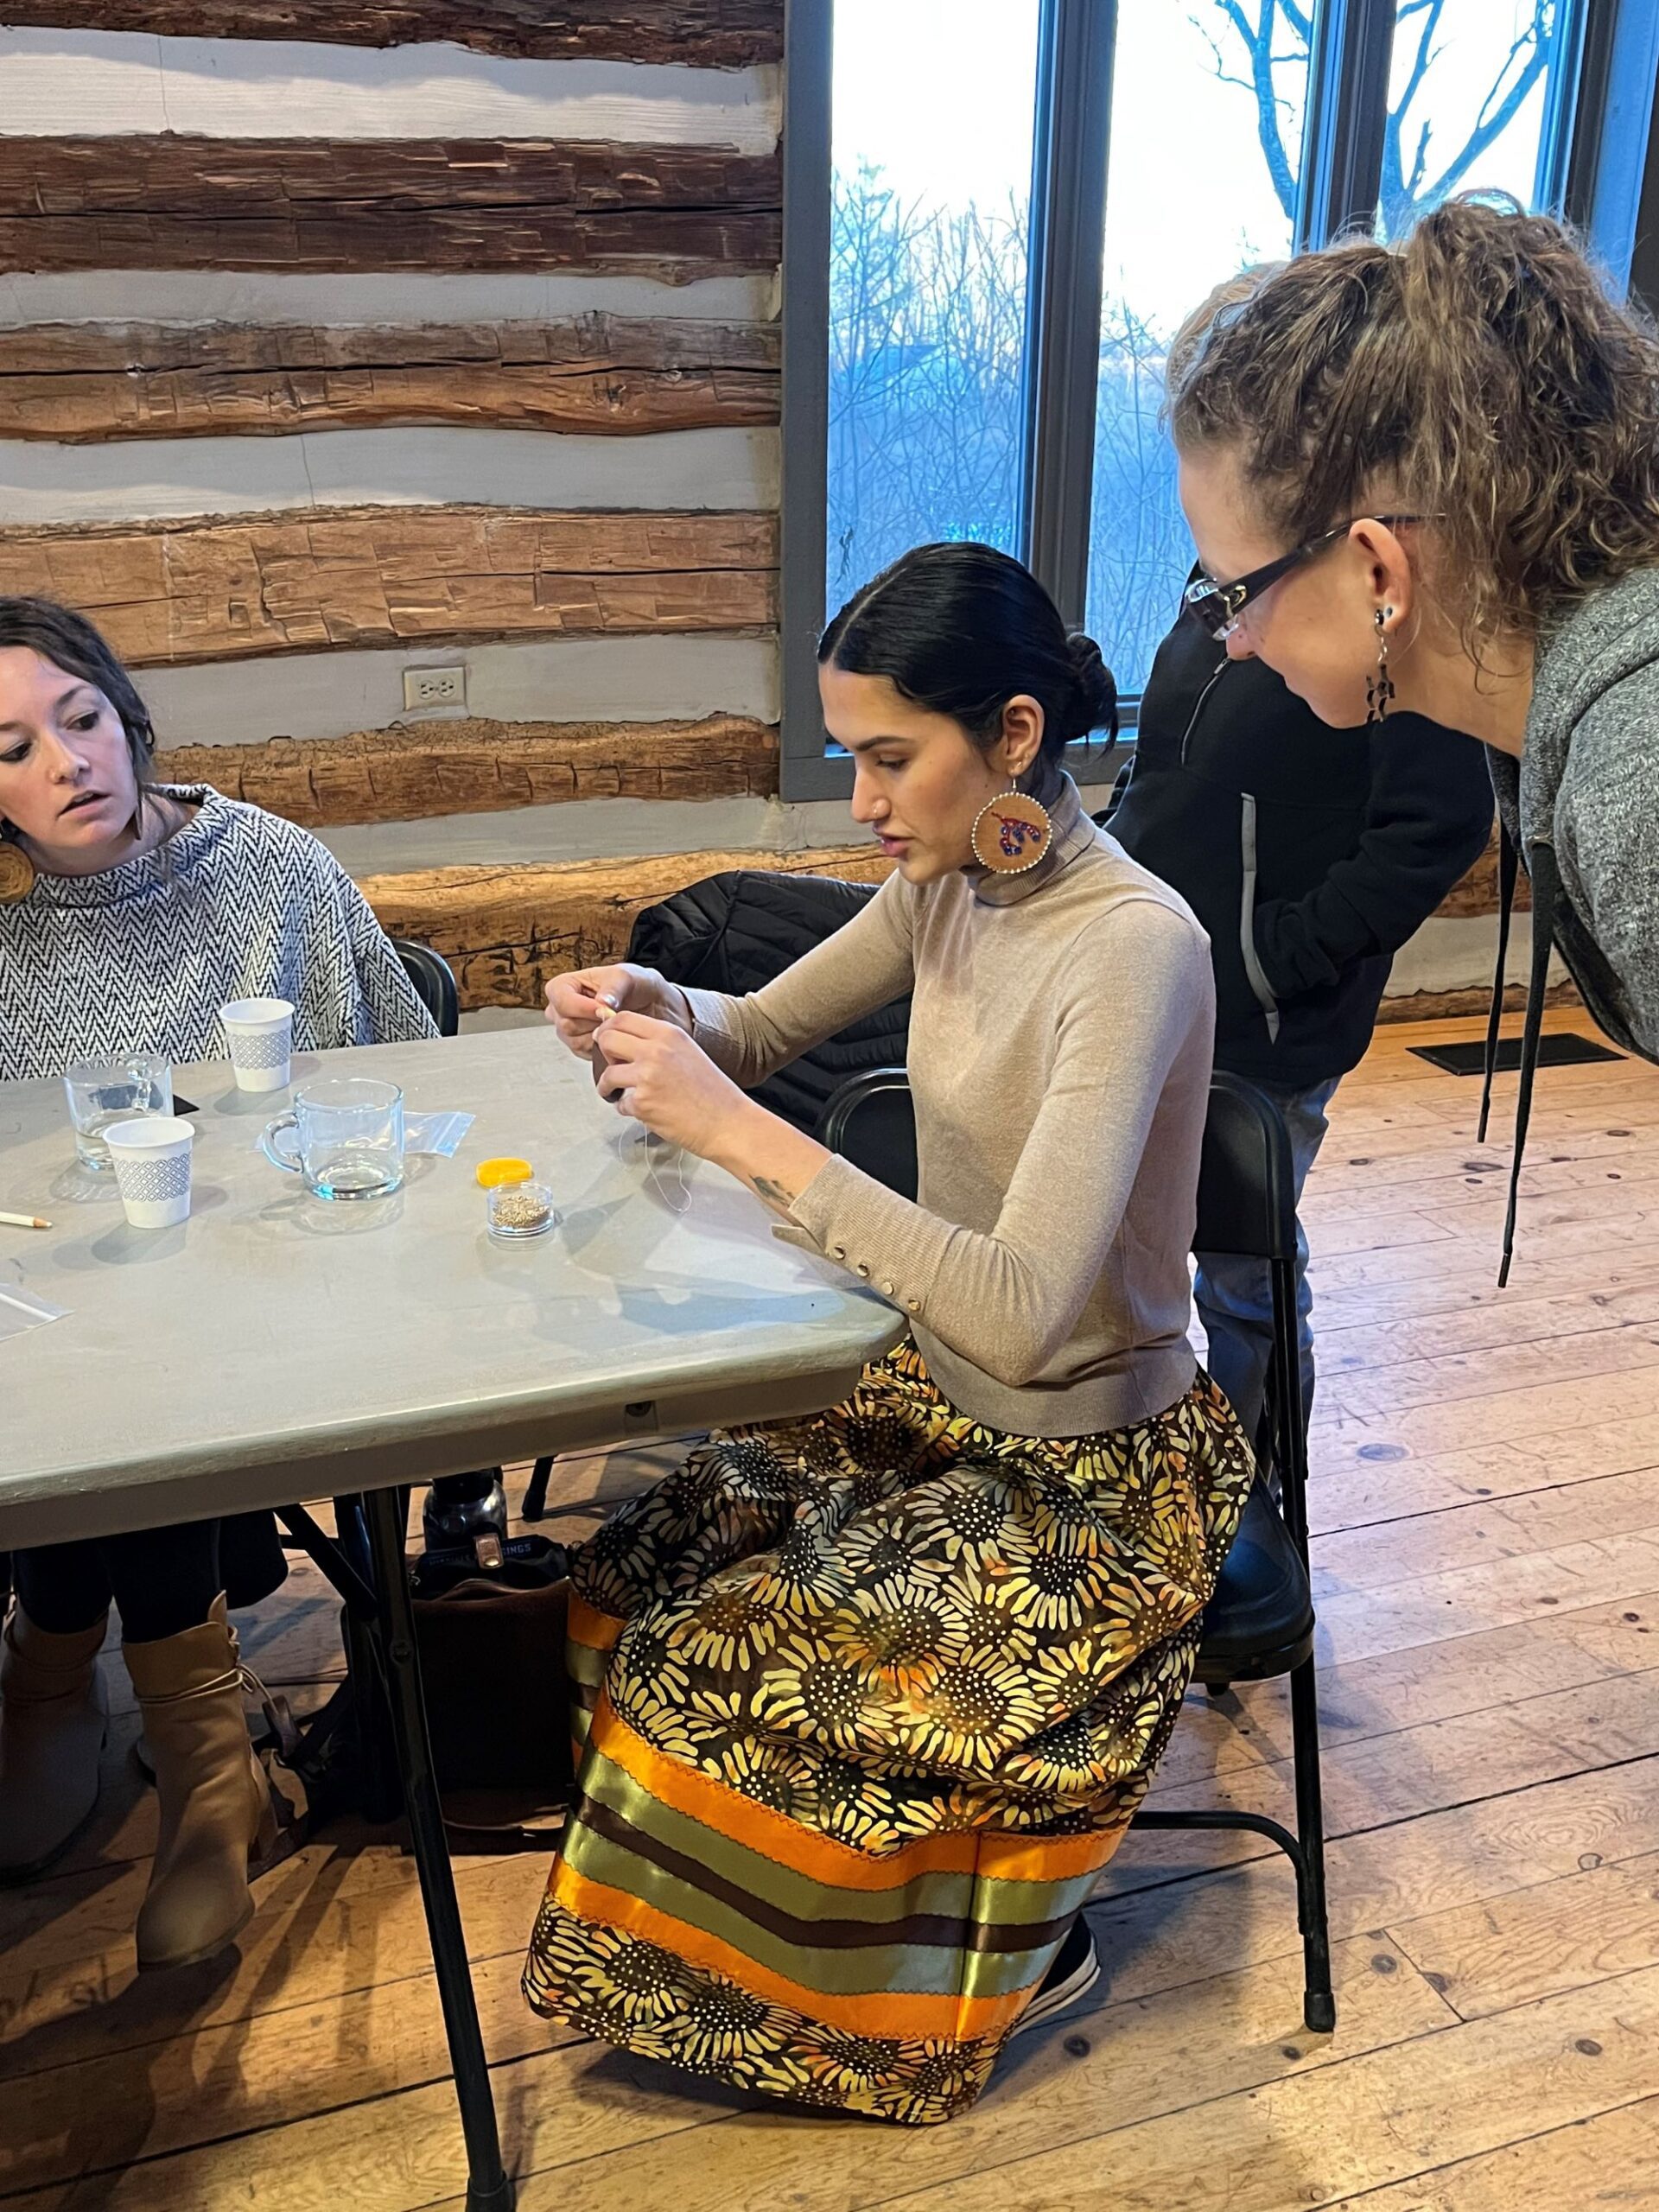 Erica Bhatti sits at a table demonstrating beadwork techniques to 2 adults looking on